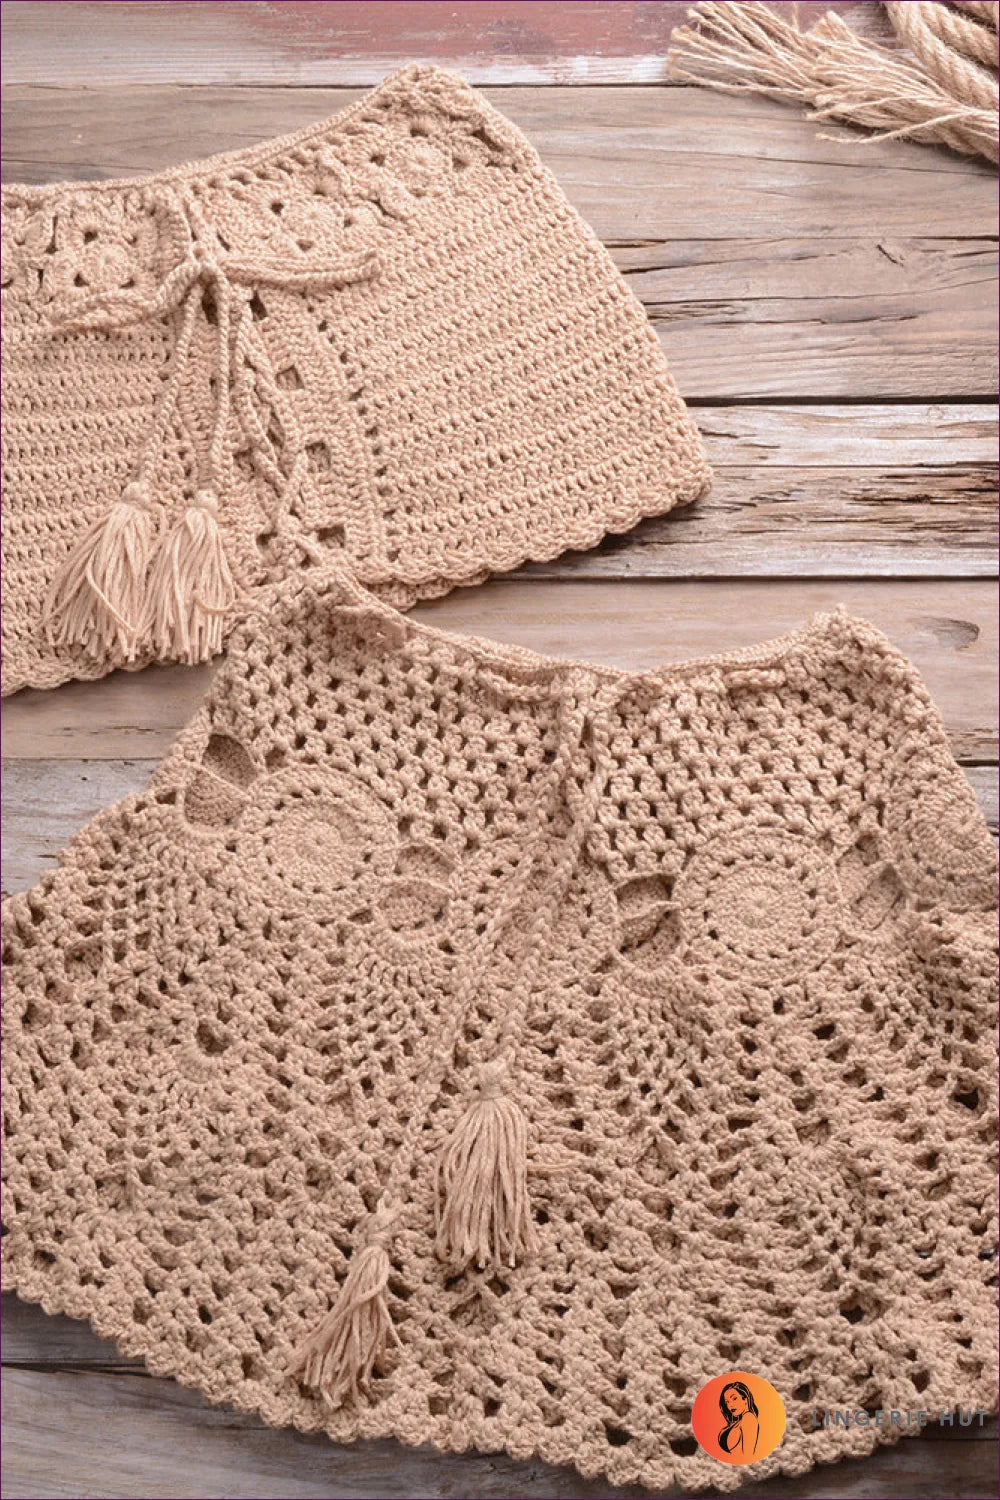 Elevate Your Beach Style With Our Dreamy Off-shoulder Beach Dress. From The Crochet Detailing To Strapless